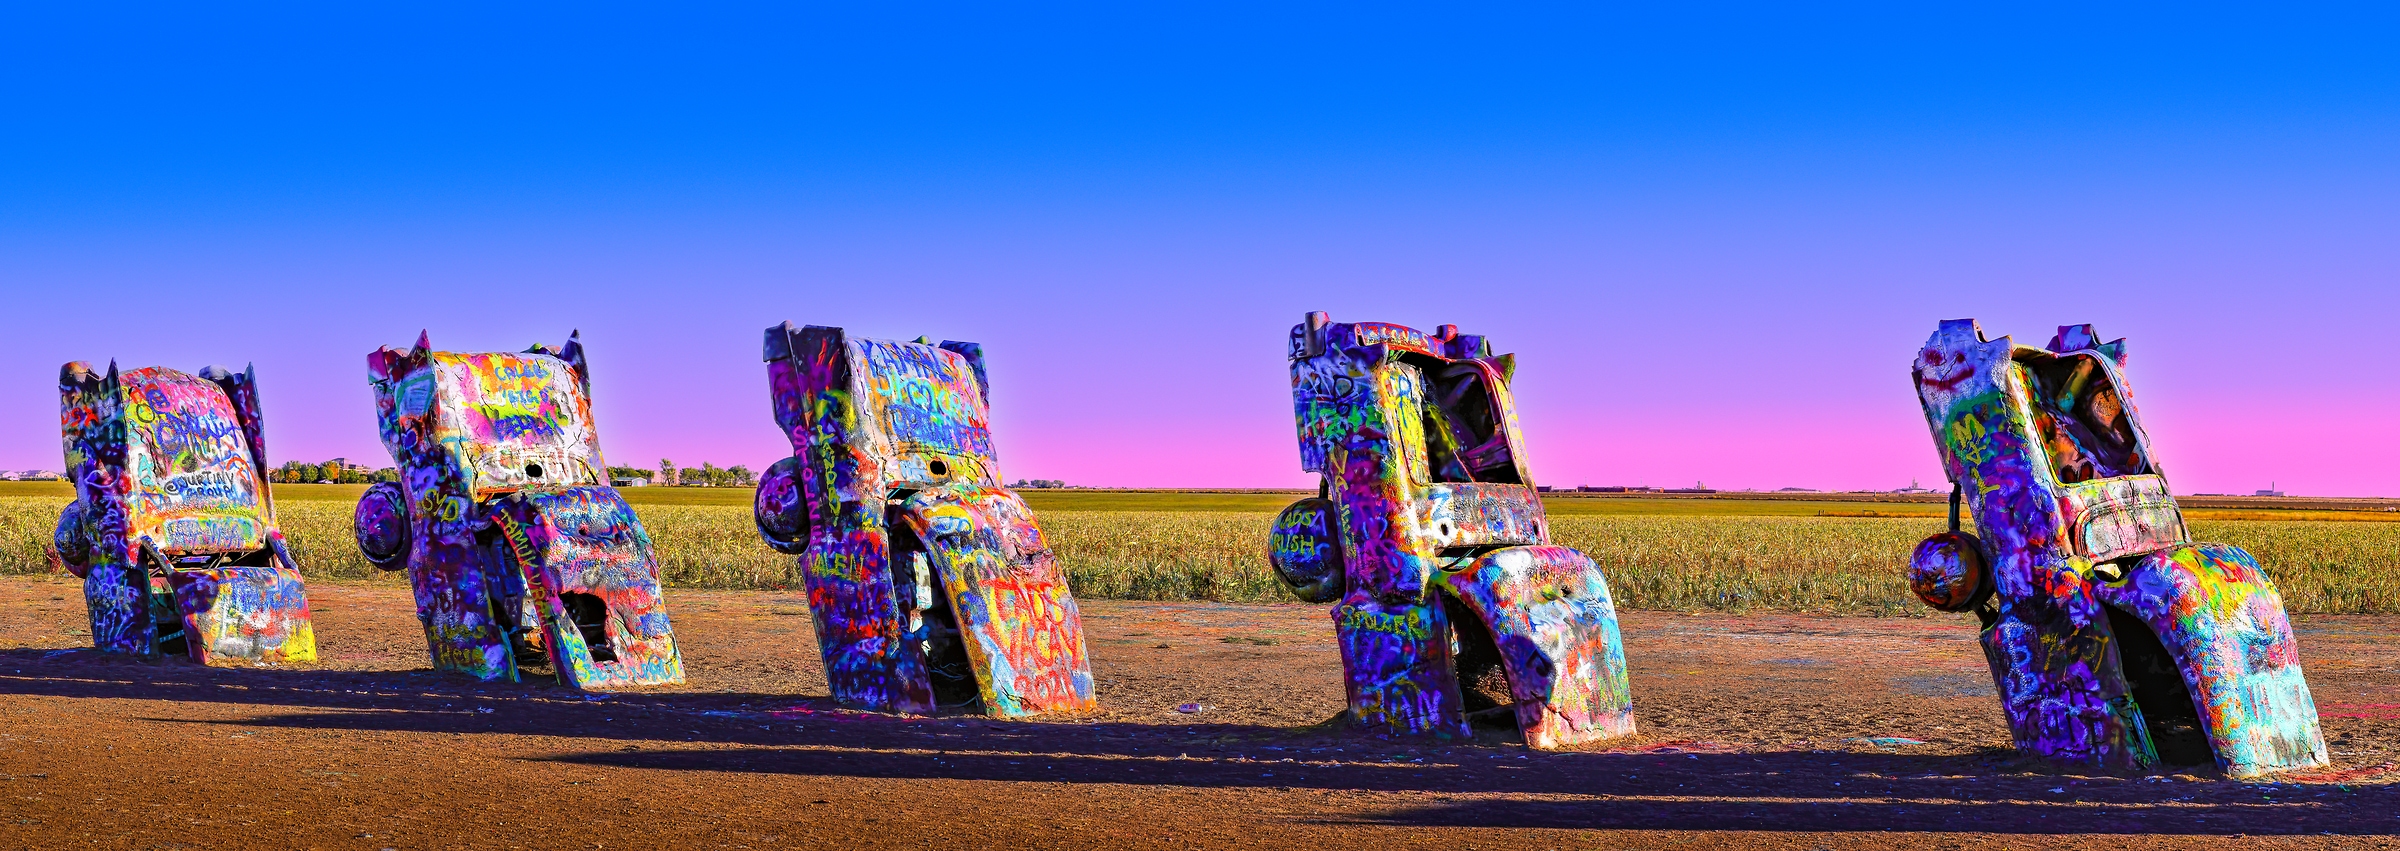 155 megapixels! A very high resolution, large-format VAST photo print of an art installation of old cars buried in the ground; photograph created by David David in Amarillo, Texas.